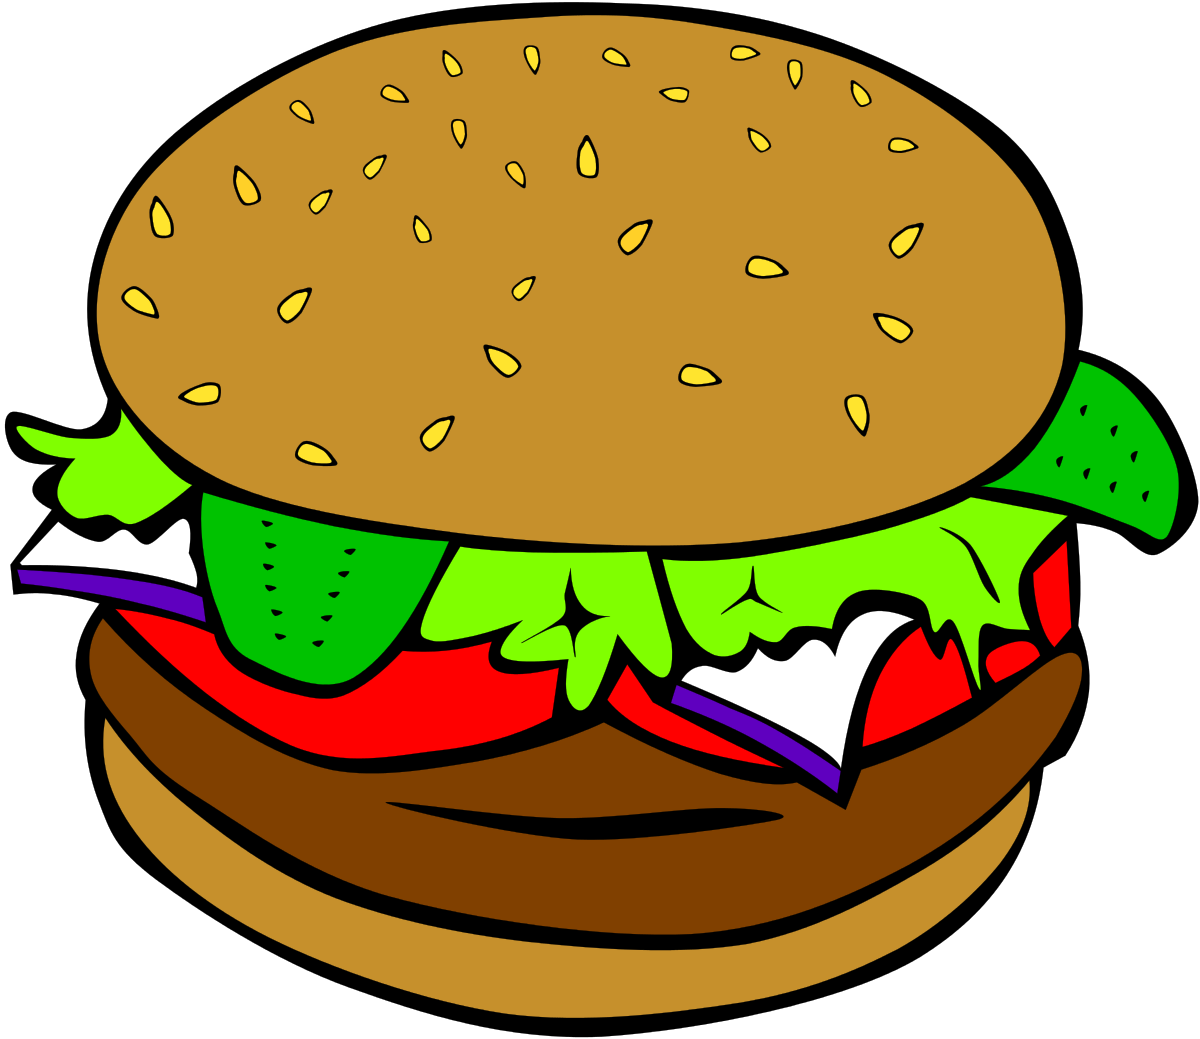 Fast Food, Lunch-Dinner, Hamburger No Cheese Clipart by chad78 ...